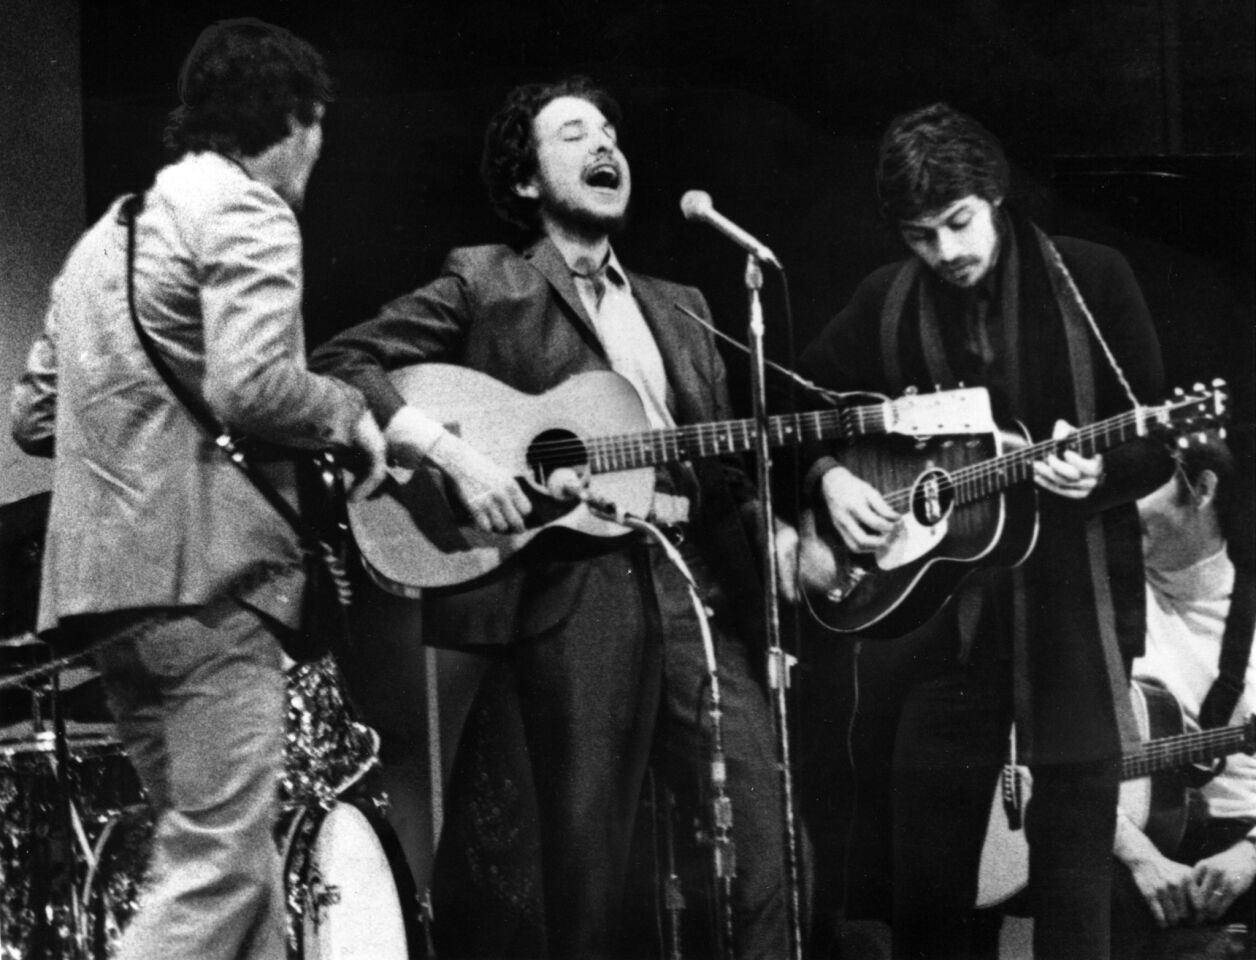 After recovering from a near-fatal 1966 motorcycle crash, Dylan regrouped, playing with a backing band soon to be known as the Band. Eschewing touring, they instead recorded dozens of songs in widely bootlegged sessions later known as "The Basement Tapes." They are shown performing Jan. 20, 1968, in New York City's Carnegie Hall.